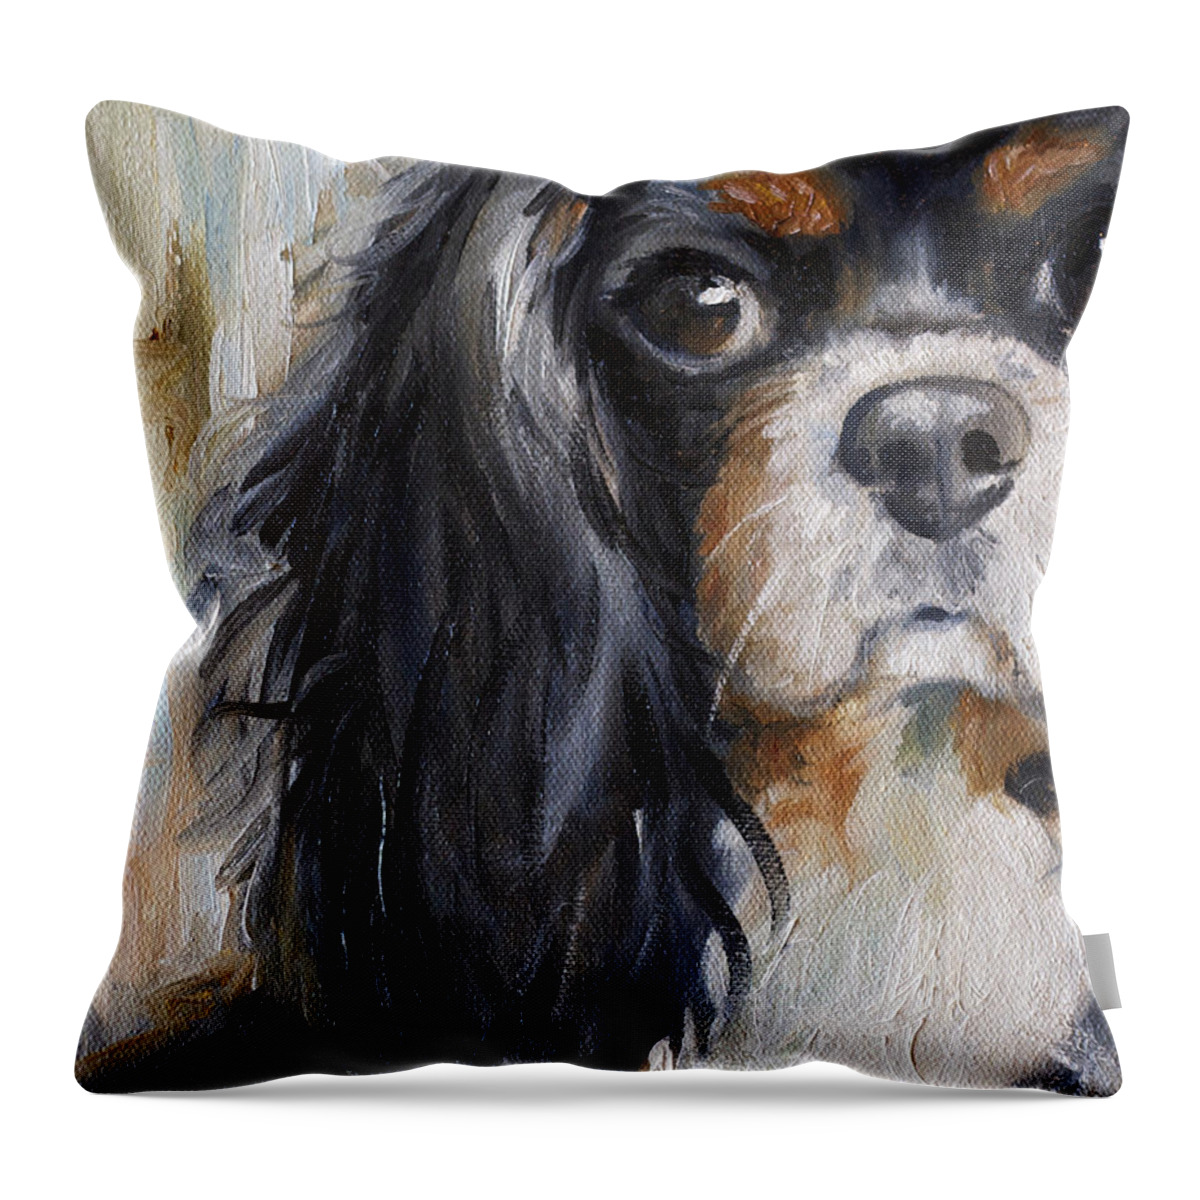 Cavalier King Charles Spaniel Throw Pillow featuring the painting Love by Mary Sparrow